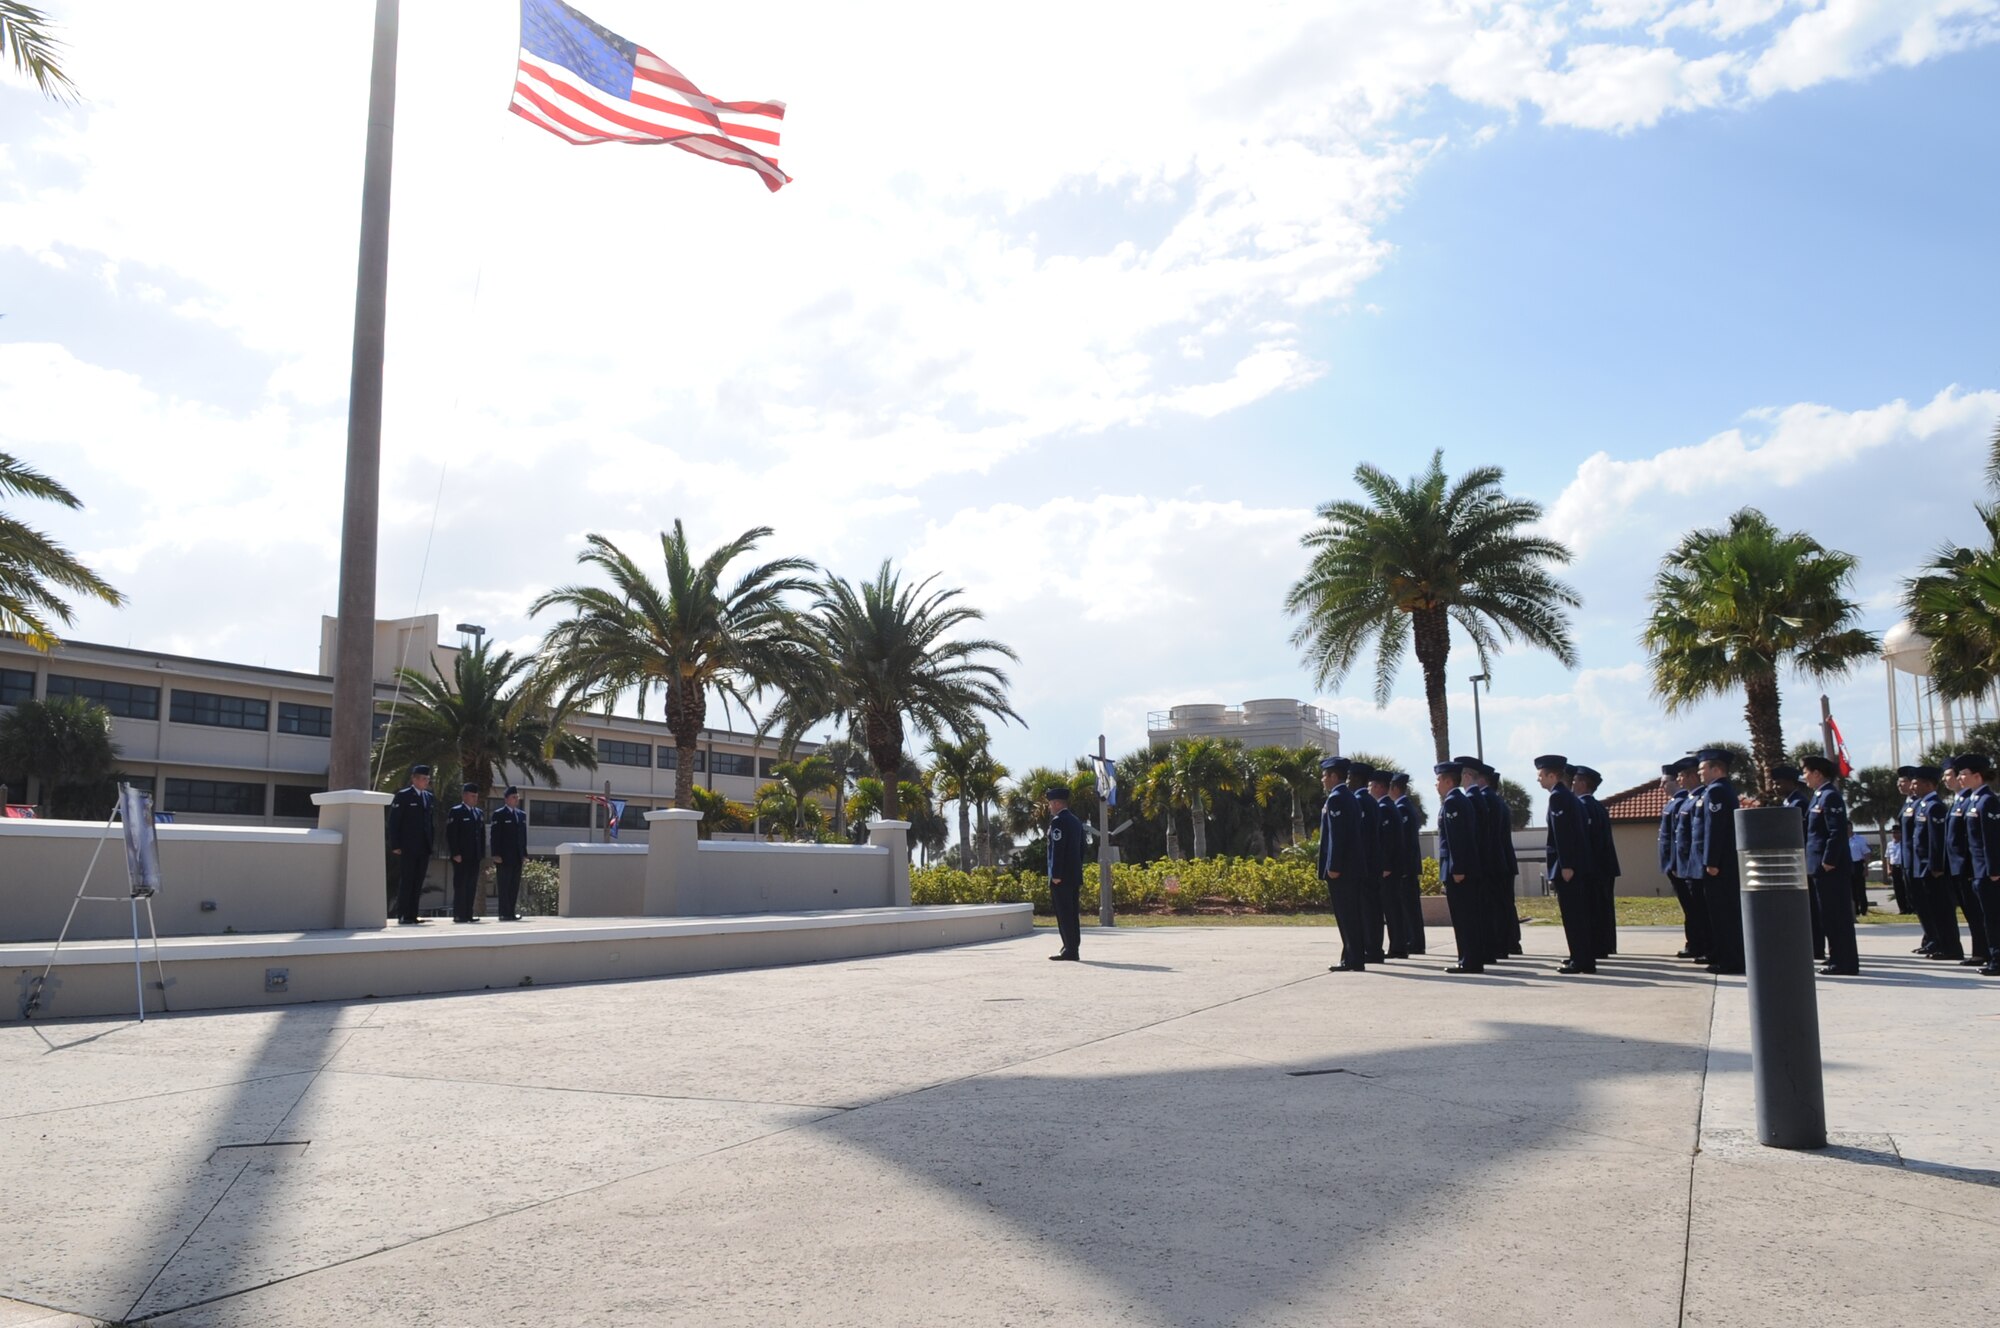 Members of the 45th Space Wing pay their respects Monday at a memorial ceremony for former Chief Master Sgt. of the Air Force Paul Airey, who passed away March 11. Chief Airey was the first Chief Master Sergeant of the Air Force, selected in 1966 from 26 finalists out of 6,000 chiefs then serving. (U.S. Air Force photo/John Connell)